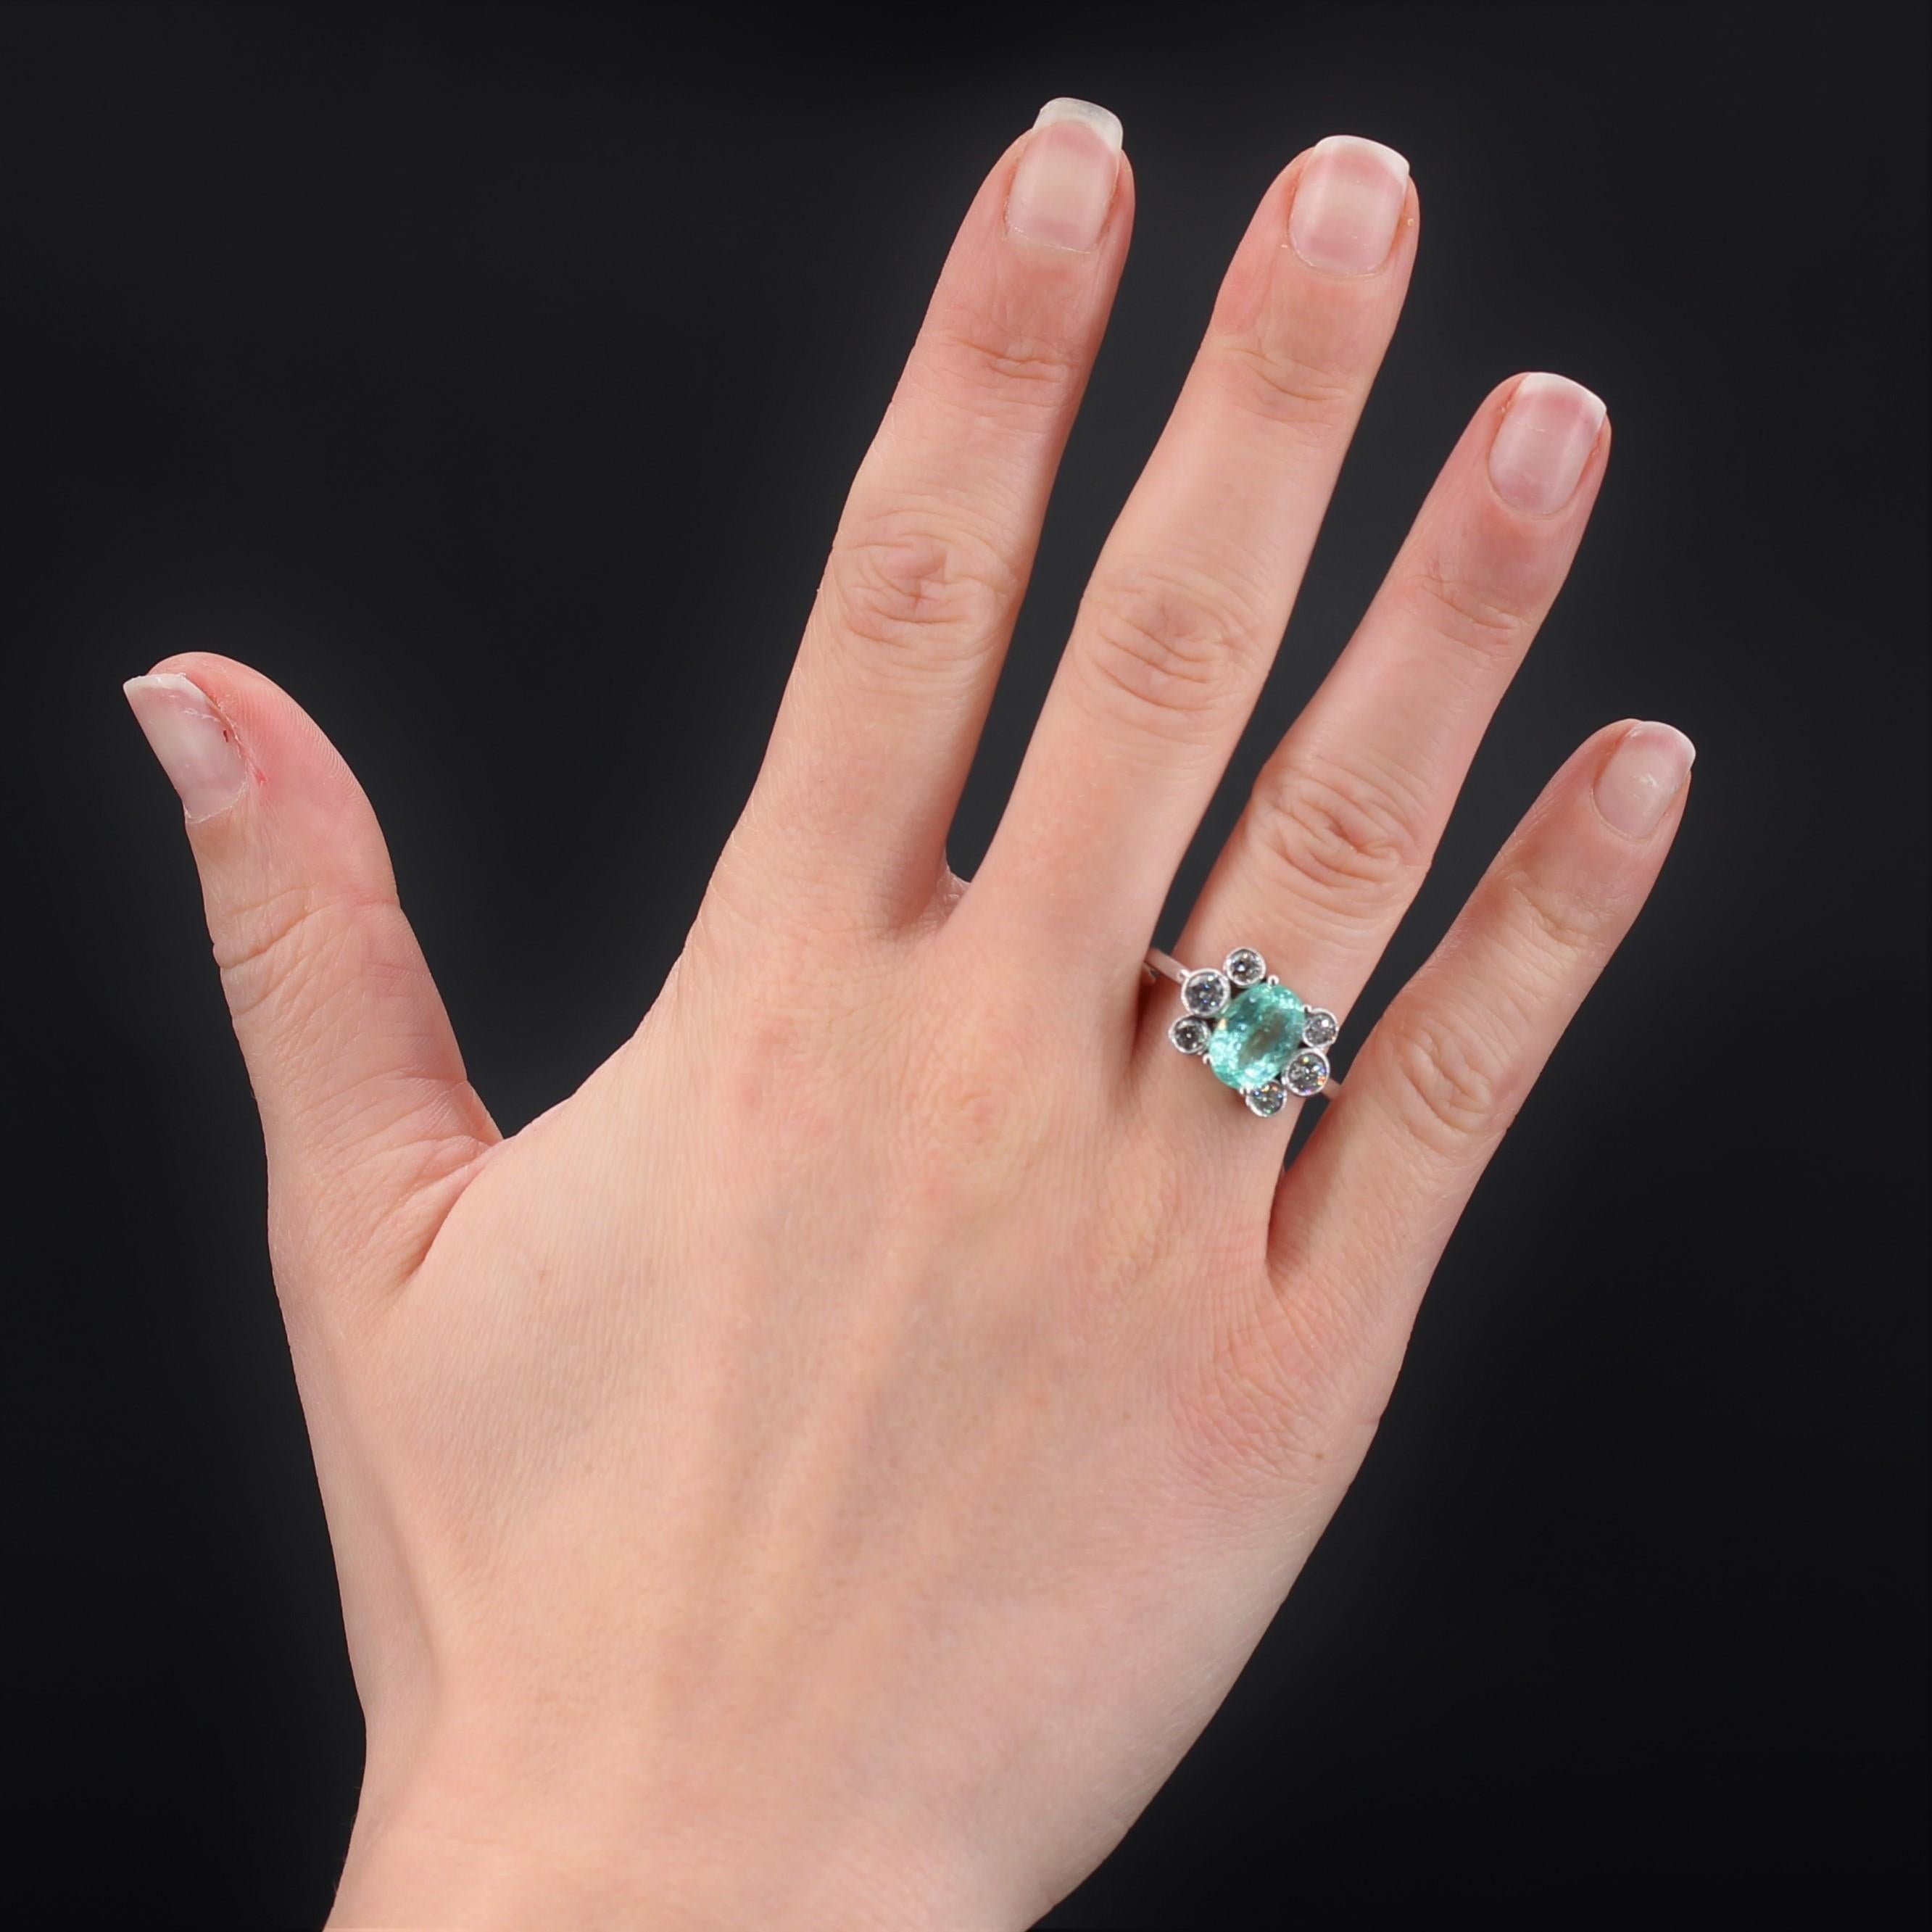 Baume creation - Unique piece.
Ring in 18 karat white gold, eagle head hallmark.
Sublime jewelry ring, it is decorated on its top with a paraiba tourmaline held in 4 claws and surrounded on both sides by 2x3 modern brilliant-cut diamonds millegrain